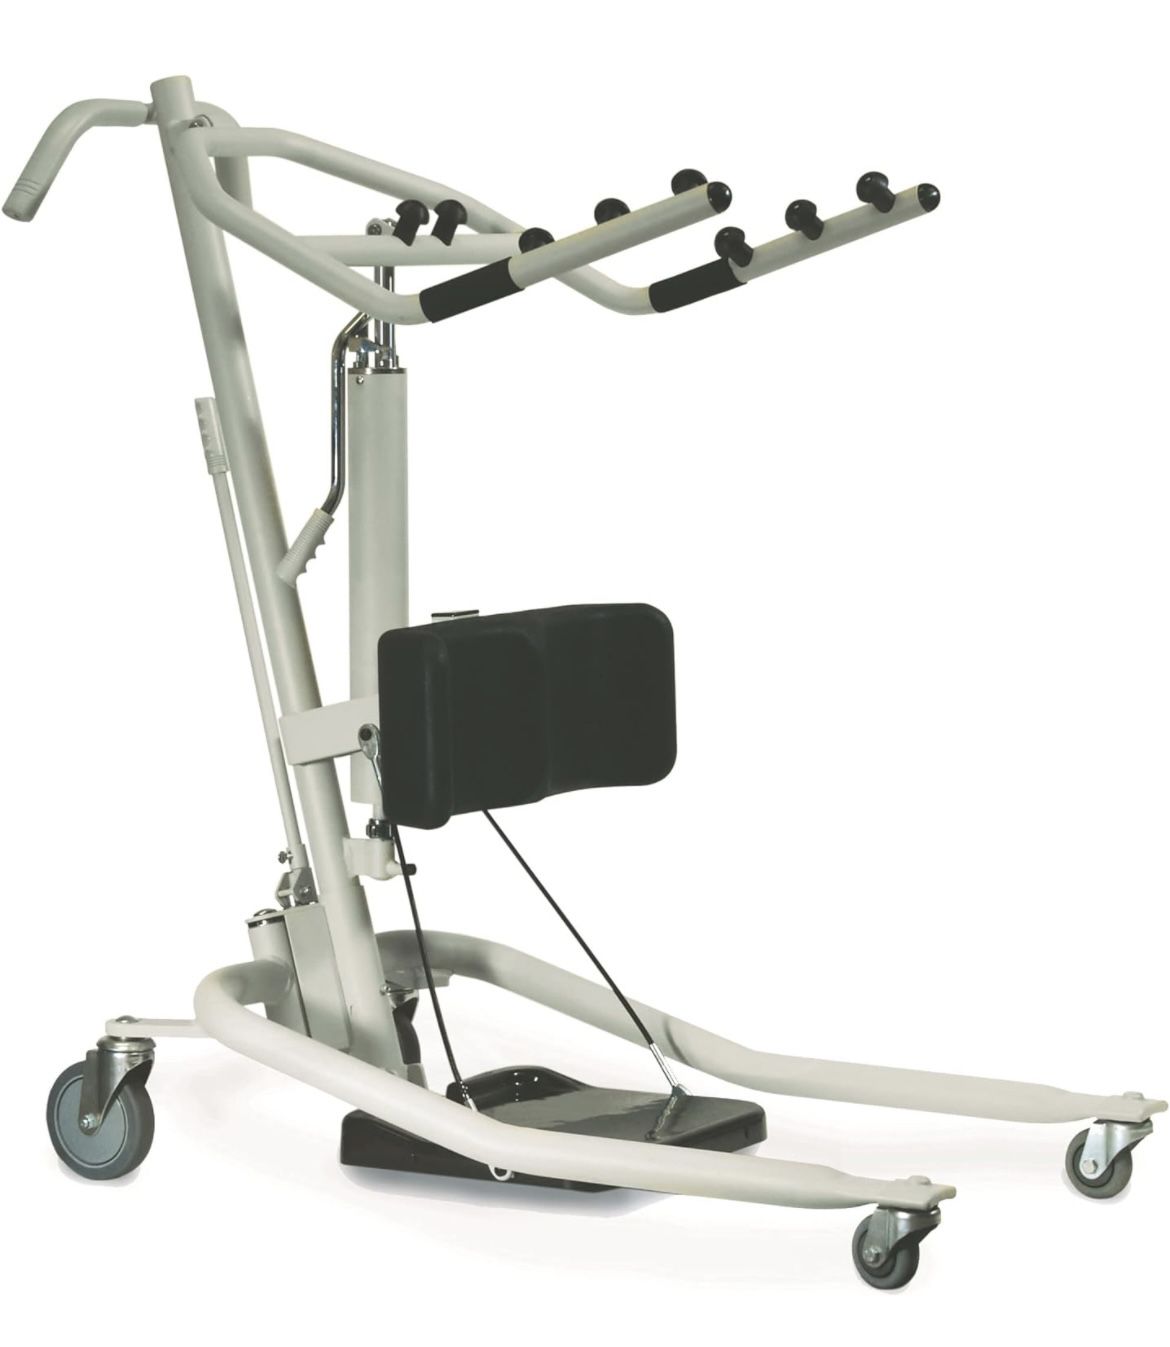 28-90 Invacare GHS350 Get-U-Up Hydraulic Sit to Stand Patient Lift, 350 lb. Weight Capacity